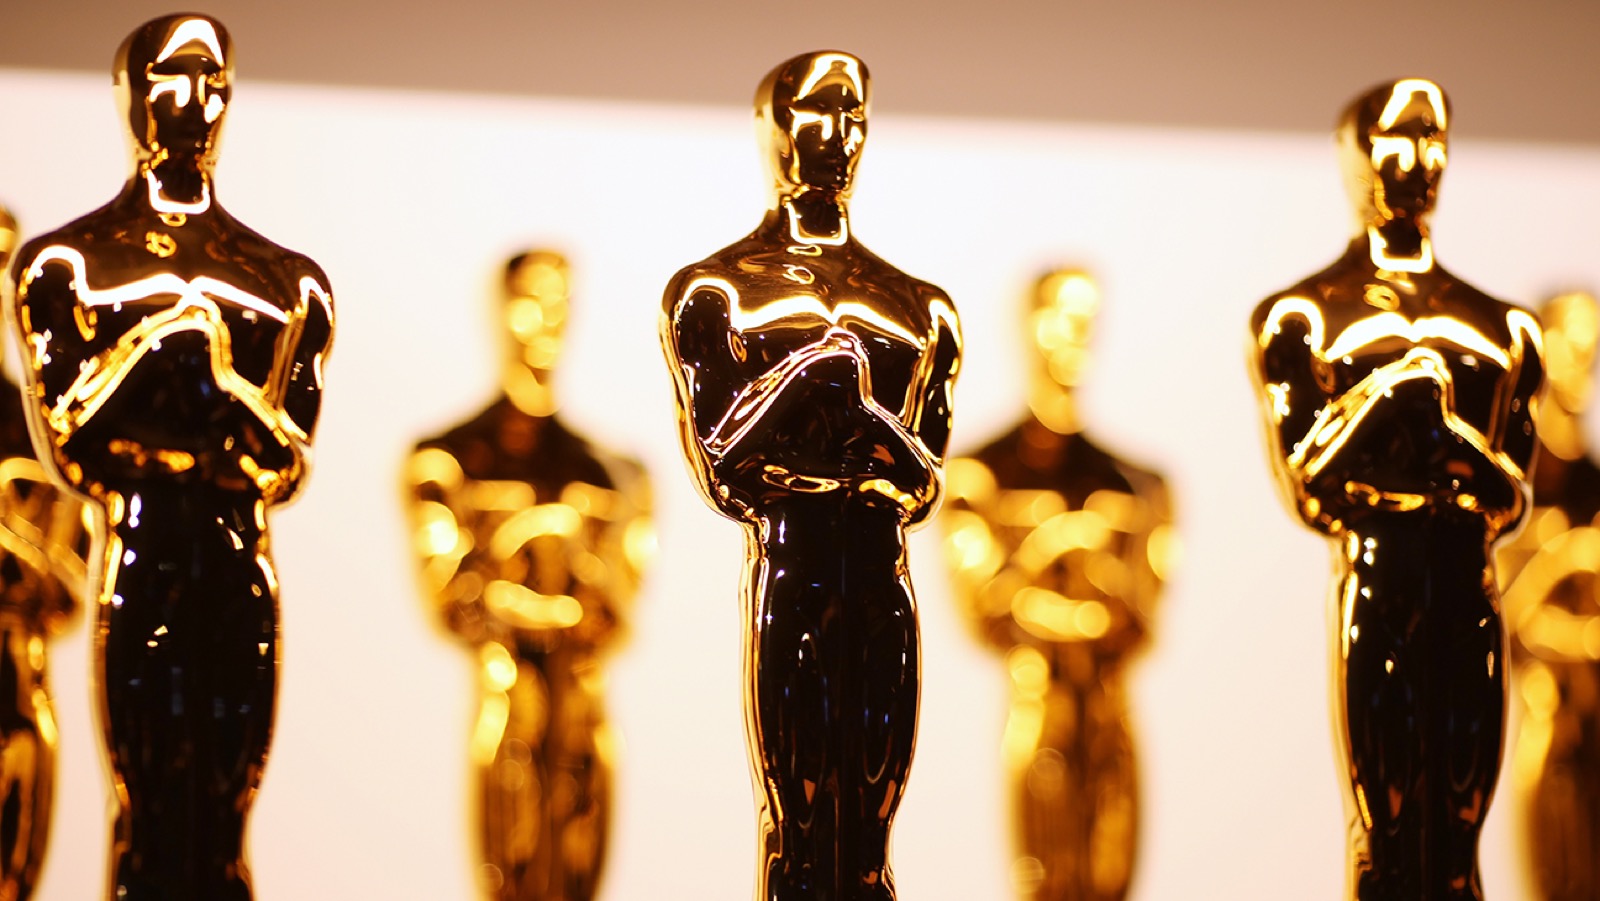 Can You Pass This Ultimate Quiz of “Two Truths and a Lie”? Oscars Academy Awards